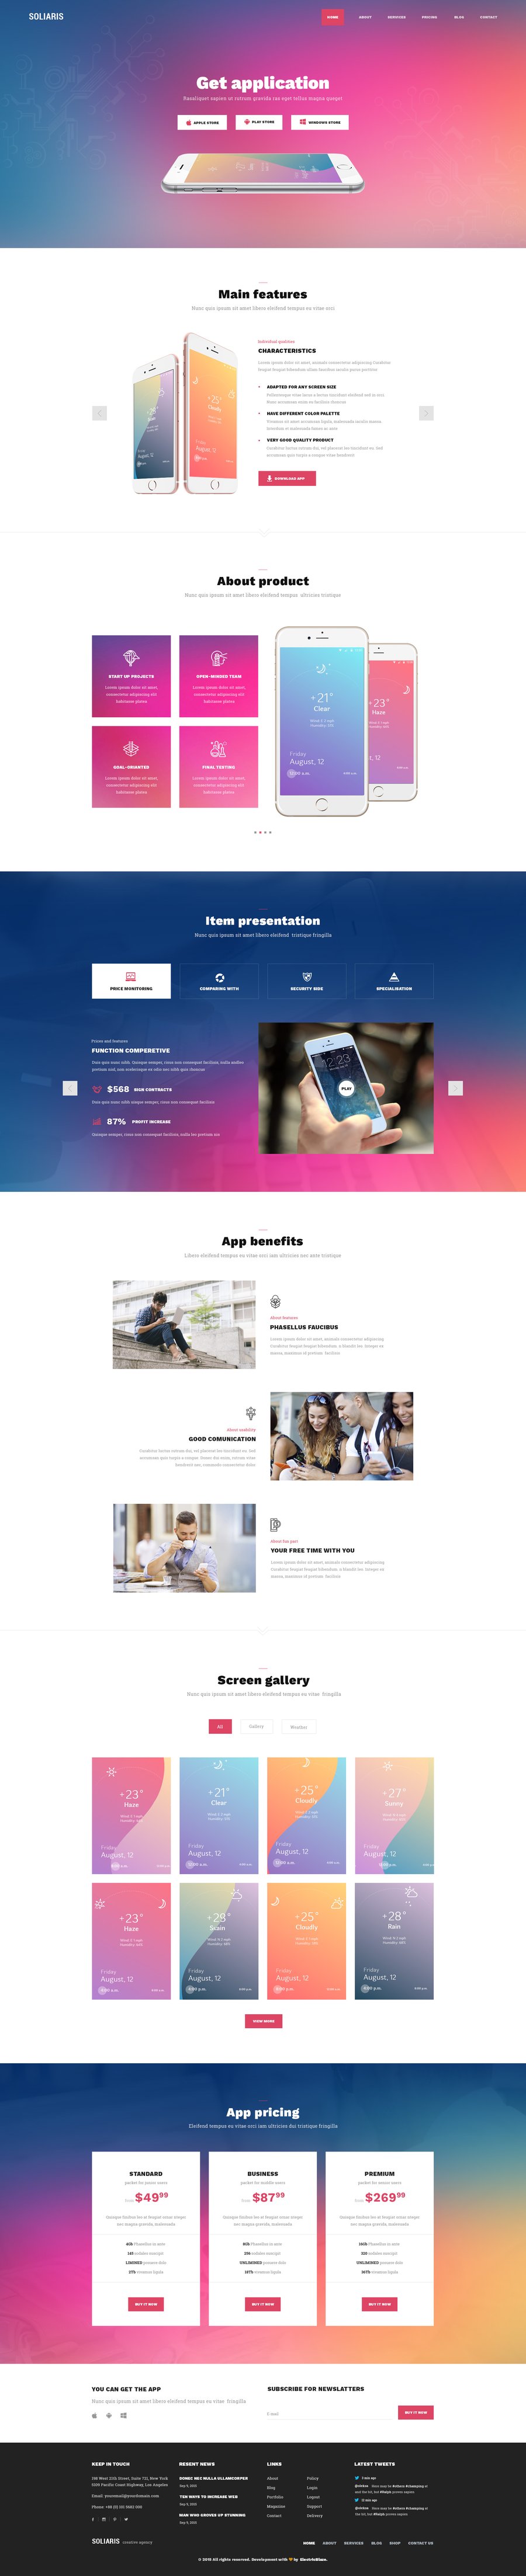 Soliaris - 18 One Page Bootstrap Templates - 2